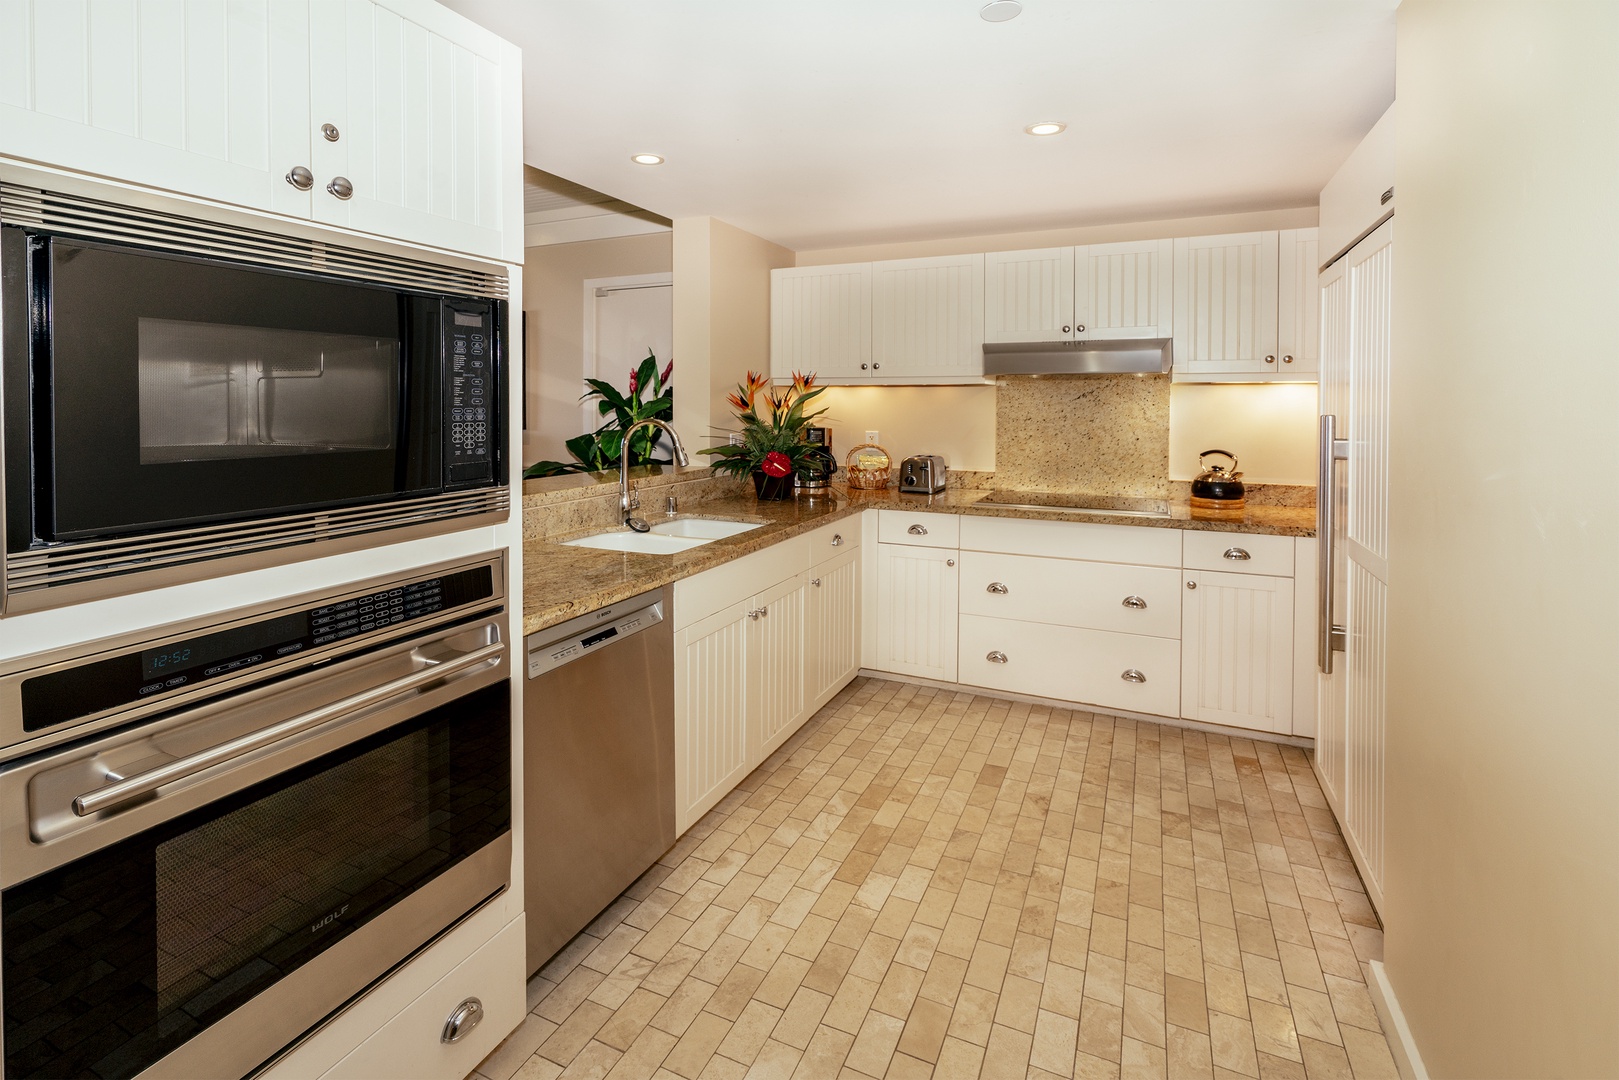 Kahuku Vacation Rentals, OFB Turtle Bay Villas 216 - Fully-stocked kitchen with high-end Sub-zero and Wolf appliances.